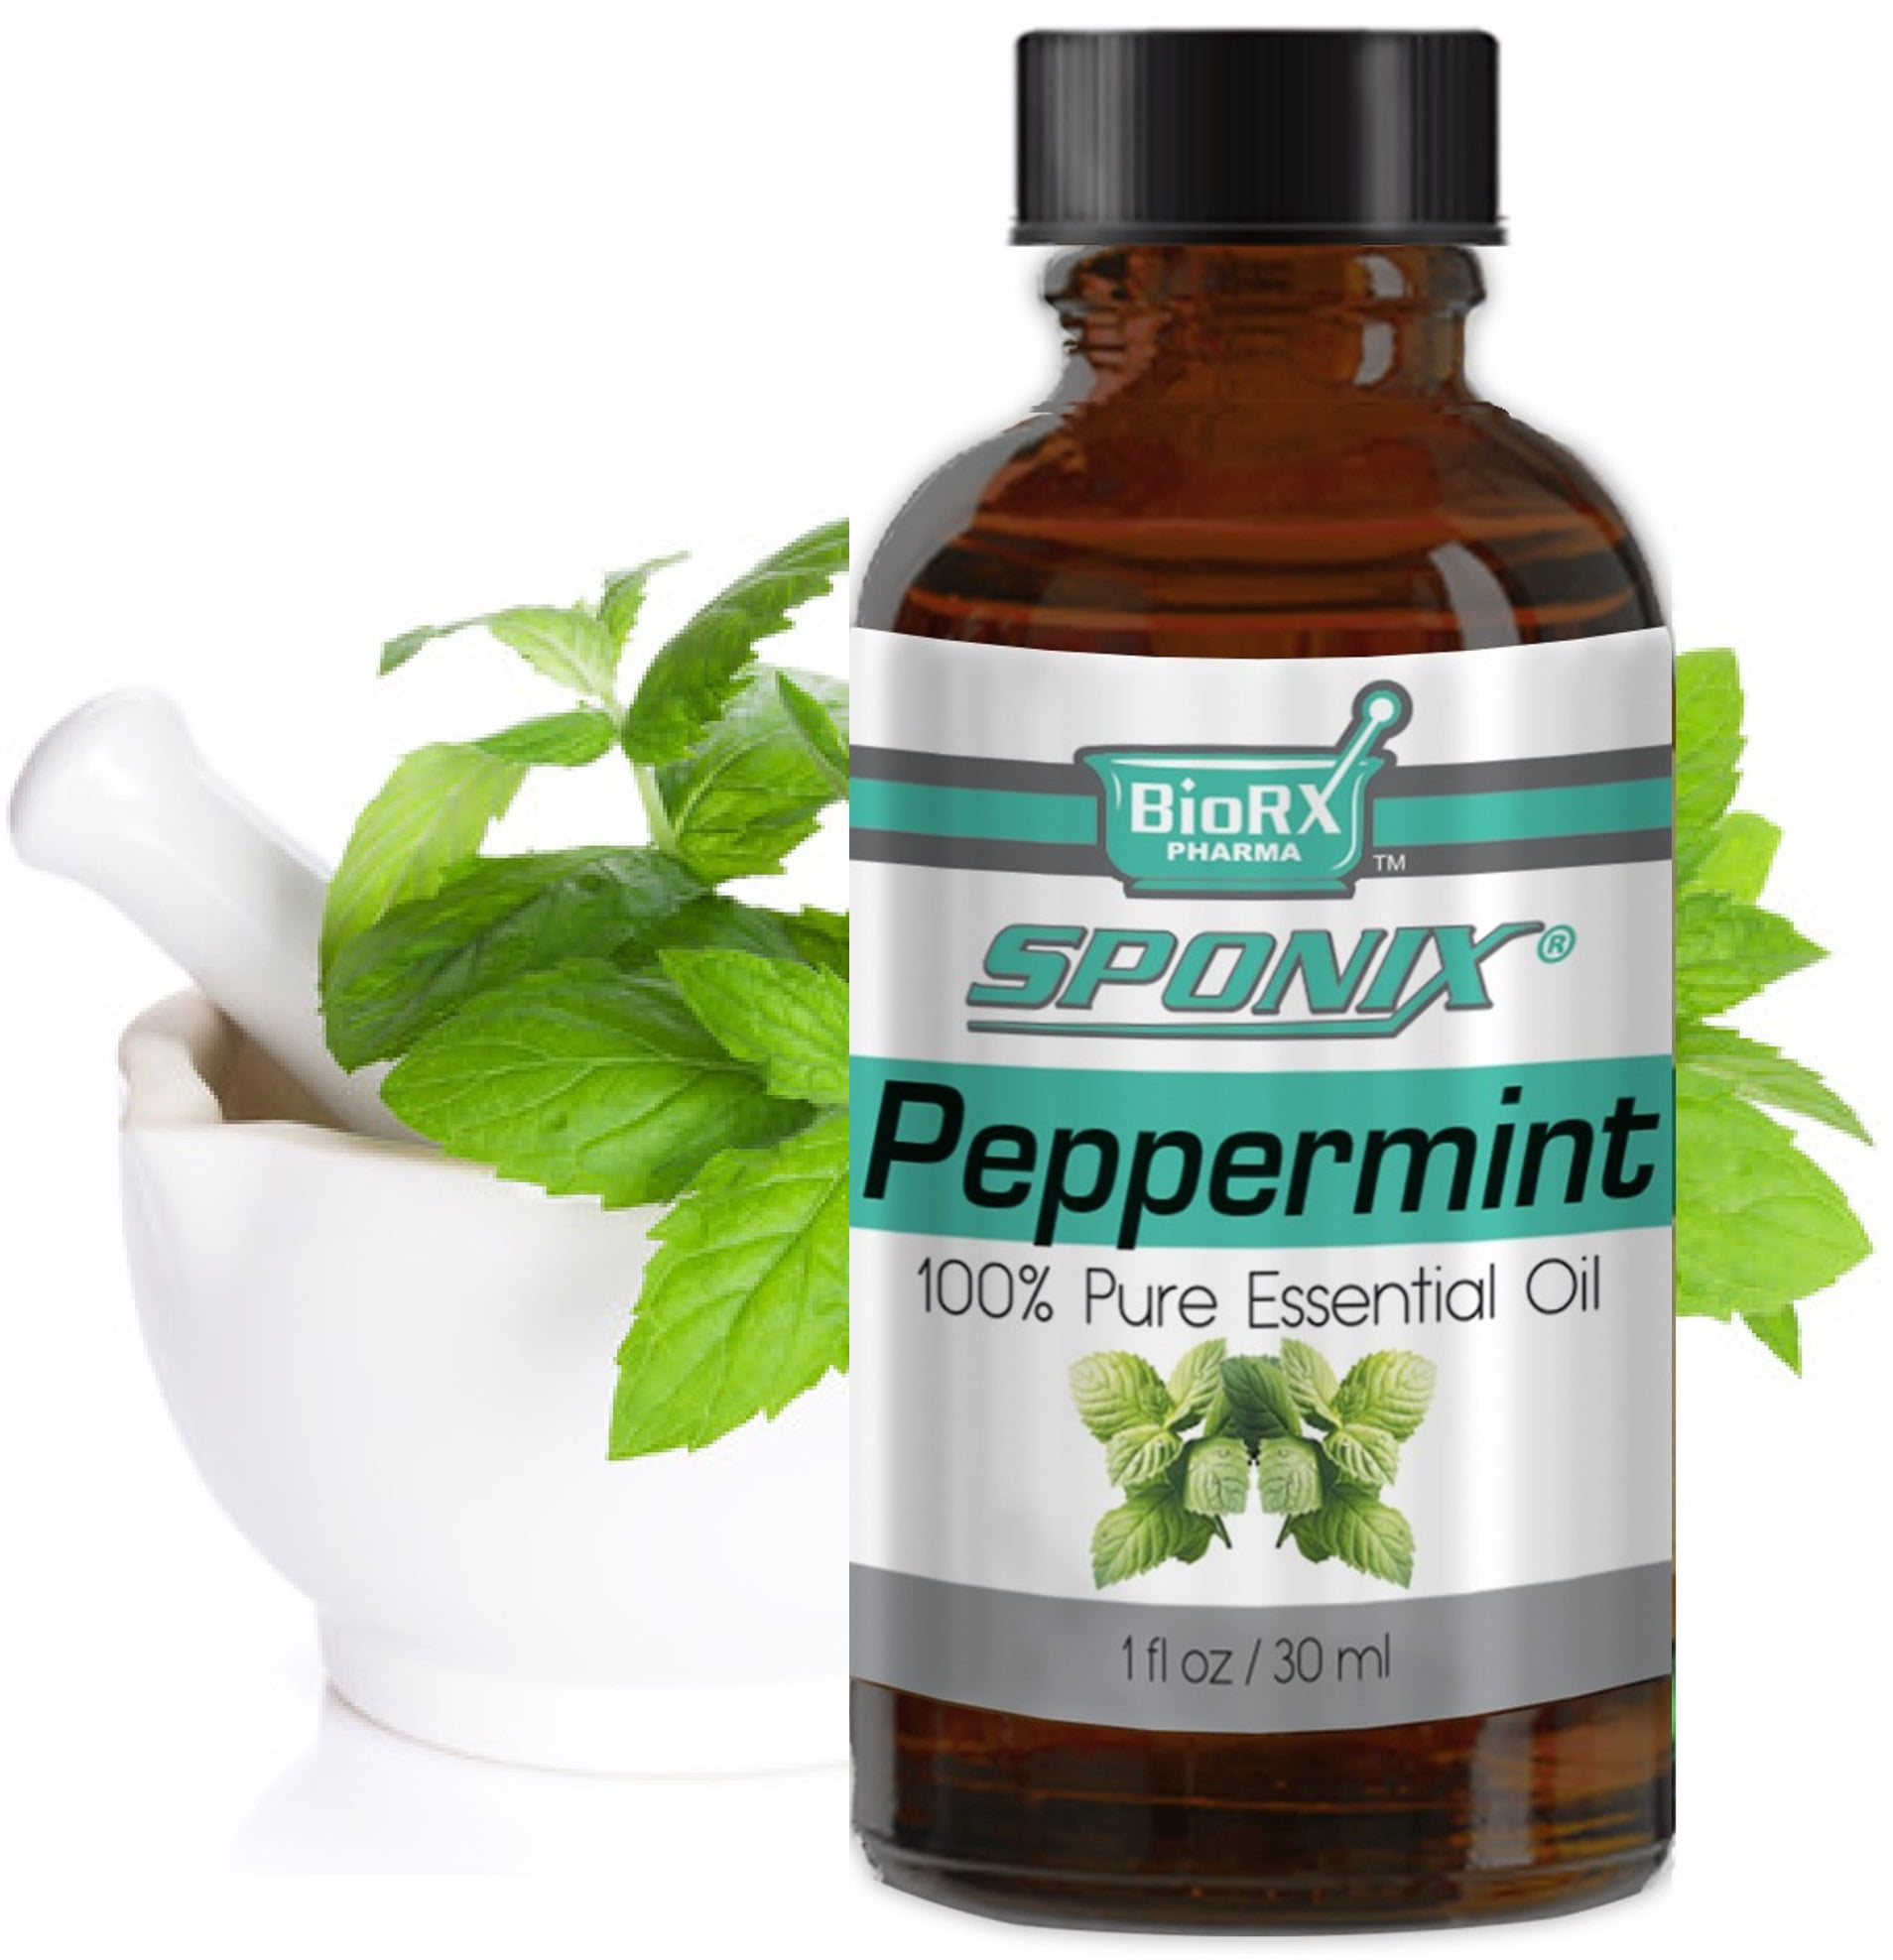 Peppermint Essential Oil 30 ml (1 oz) Aromatherapy - Made with 100% Pure Therapeutic Grade Essential Oils by Sponix